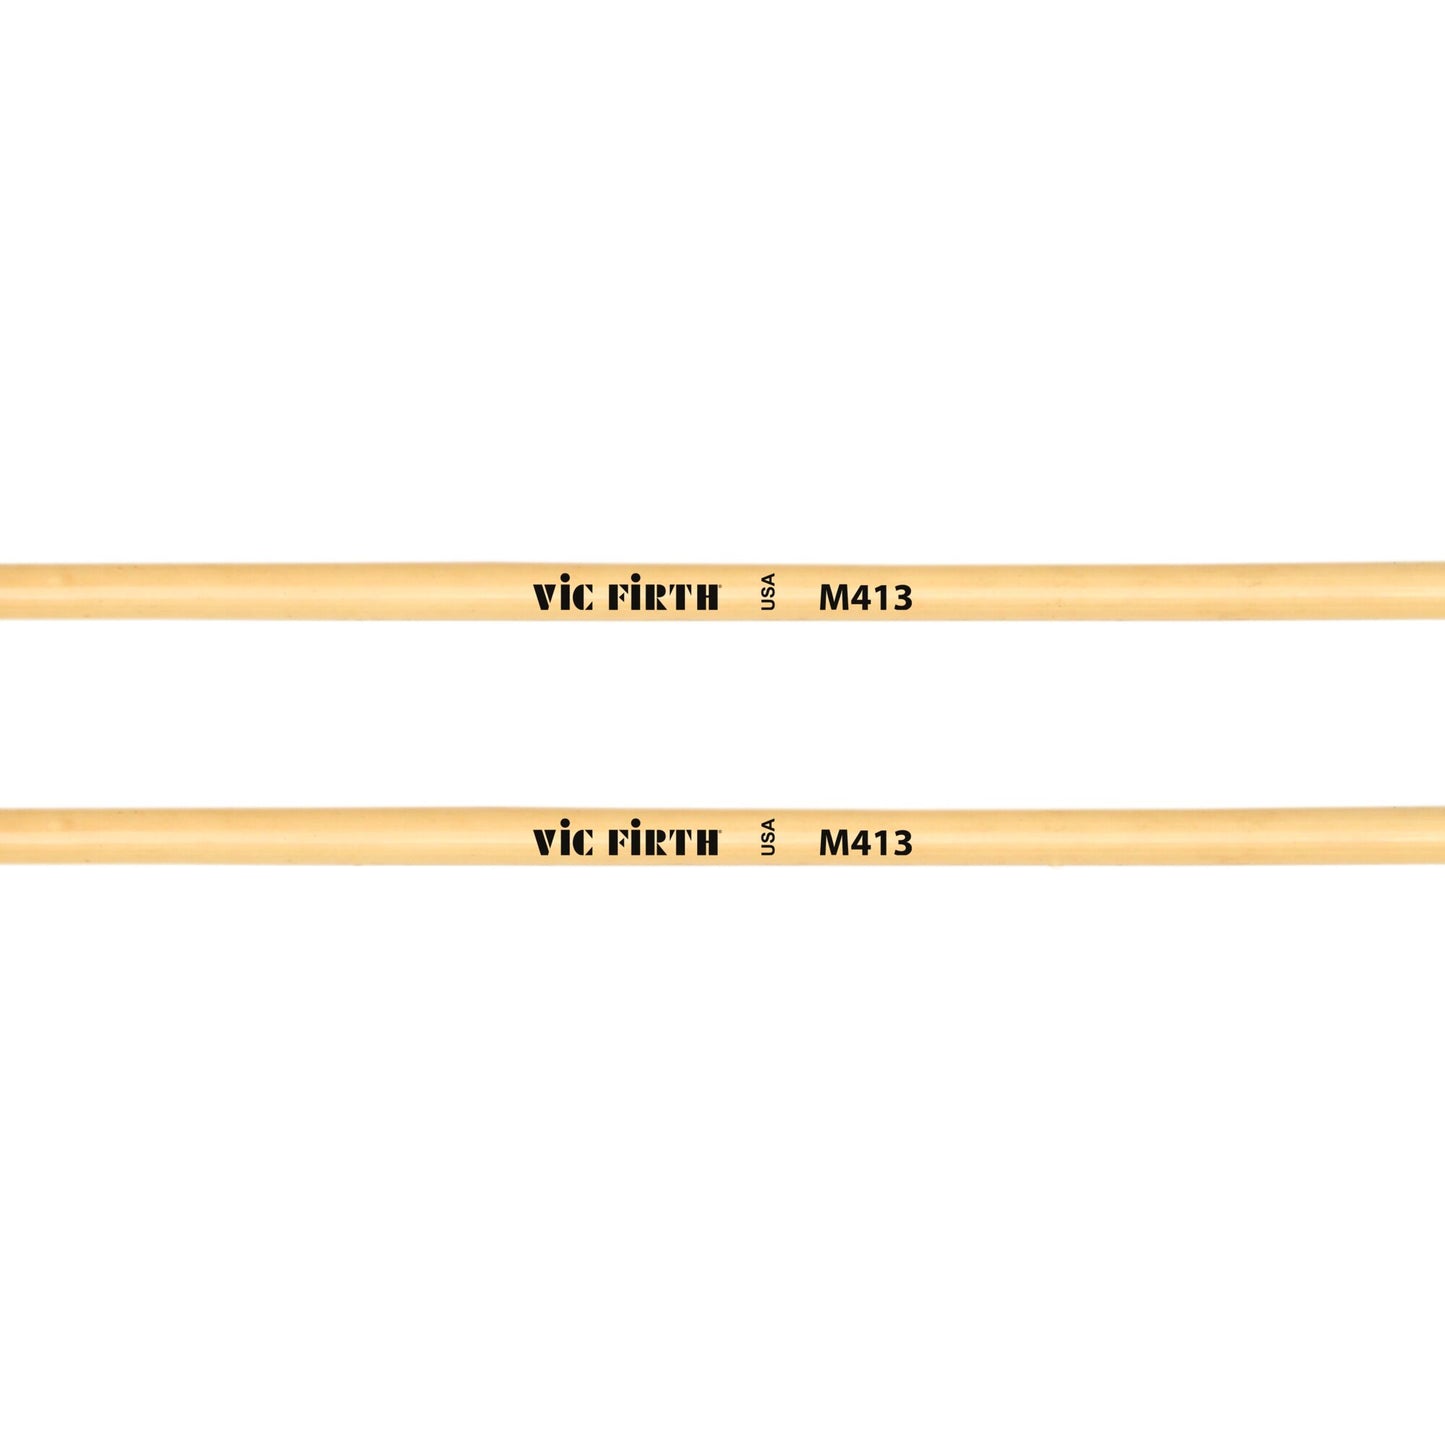 Articulate Series Keyboard Mallet - Medium Hard Synthetic, Round